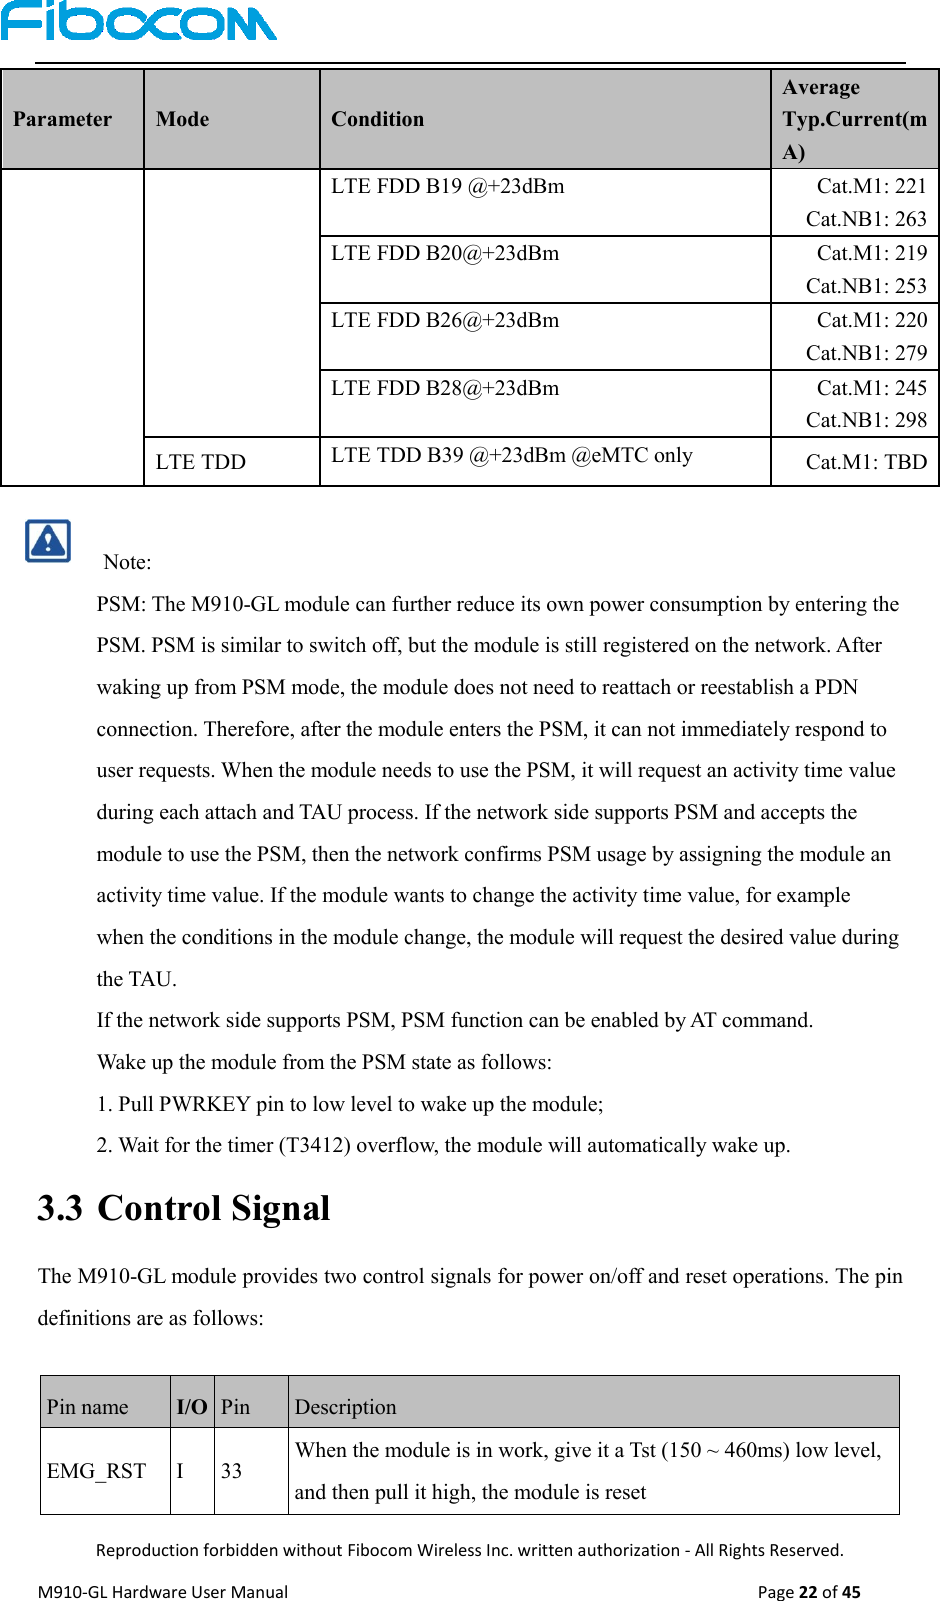  Reproduction forbidden without Fibocom Wireless Inc. written authorization - All Rights Reserved. M910-GL Hardware User Manual                                                                                                  Page 22 of 45  Parameter Mode Condition Average Typ.Current(mA) LTE FDD B19 @+23dBm Cat.M1: 221 Cat.NB1: 263 LTE FDD B20@+23dBm Cat.M1: 219 Cat.NB1: 253 LTE FDD B26@+23dBm Cat.M1: 220 Cat.NB1: 279 LTE FDD B28@+23dBm Cat.M1: 245 Cat.NB1: 298 LTE TDD LTE TDD B39 @+23dBm @eMTC only Cat.M1: TBD        Note: PSM: The M910-GL module can further reduce its own power consumption by entering the PSM. PSM is similar to switch off, but the module is still registered on the network. After waking up from PSM mode, the module does not need to reattach or reestablish a PDN connection. Therefore, after the module enters the PSM, it can not immediately respond to user requests. When the module needs to use the PSM, it will request an activity time value during each attach and TAU process. If the network side supports PSM and accepts the module to use the PSM, then the network confirms PSM usage by assigning the module an activity time value. If the module wants to change the activity time value, for example when the conditions in the module change, the module will request the desired value during the TAU. If the network side supports PSM, PSM function can be enabled by AT command. Wake up the module from the PSM state as follows: 1. Pull PWRKEY pin to low level to wake up the module; 2. Wait for the timer (T3412) overflow, the module will automatically wake up. 3.3 Control Signal The M910-GL module provides two control signals for power on/off and reset operations. The pin definitions are as follows:  Pin name I/O Pin Description EMG_RST I 33 When the module is in work, give it a Tst (150 ~ 460ms) low level, and then pull it high, the module is reset 